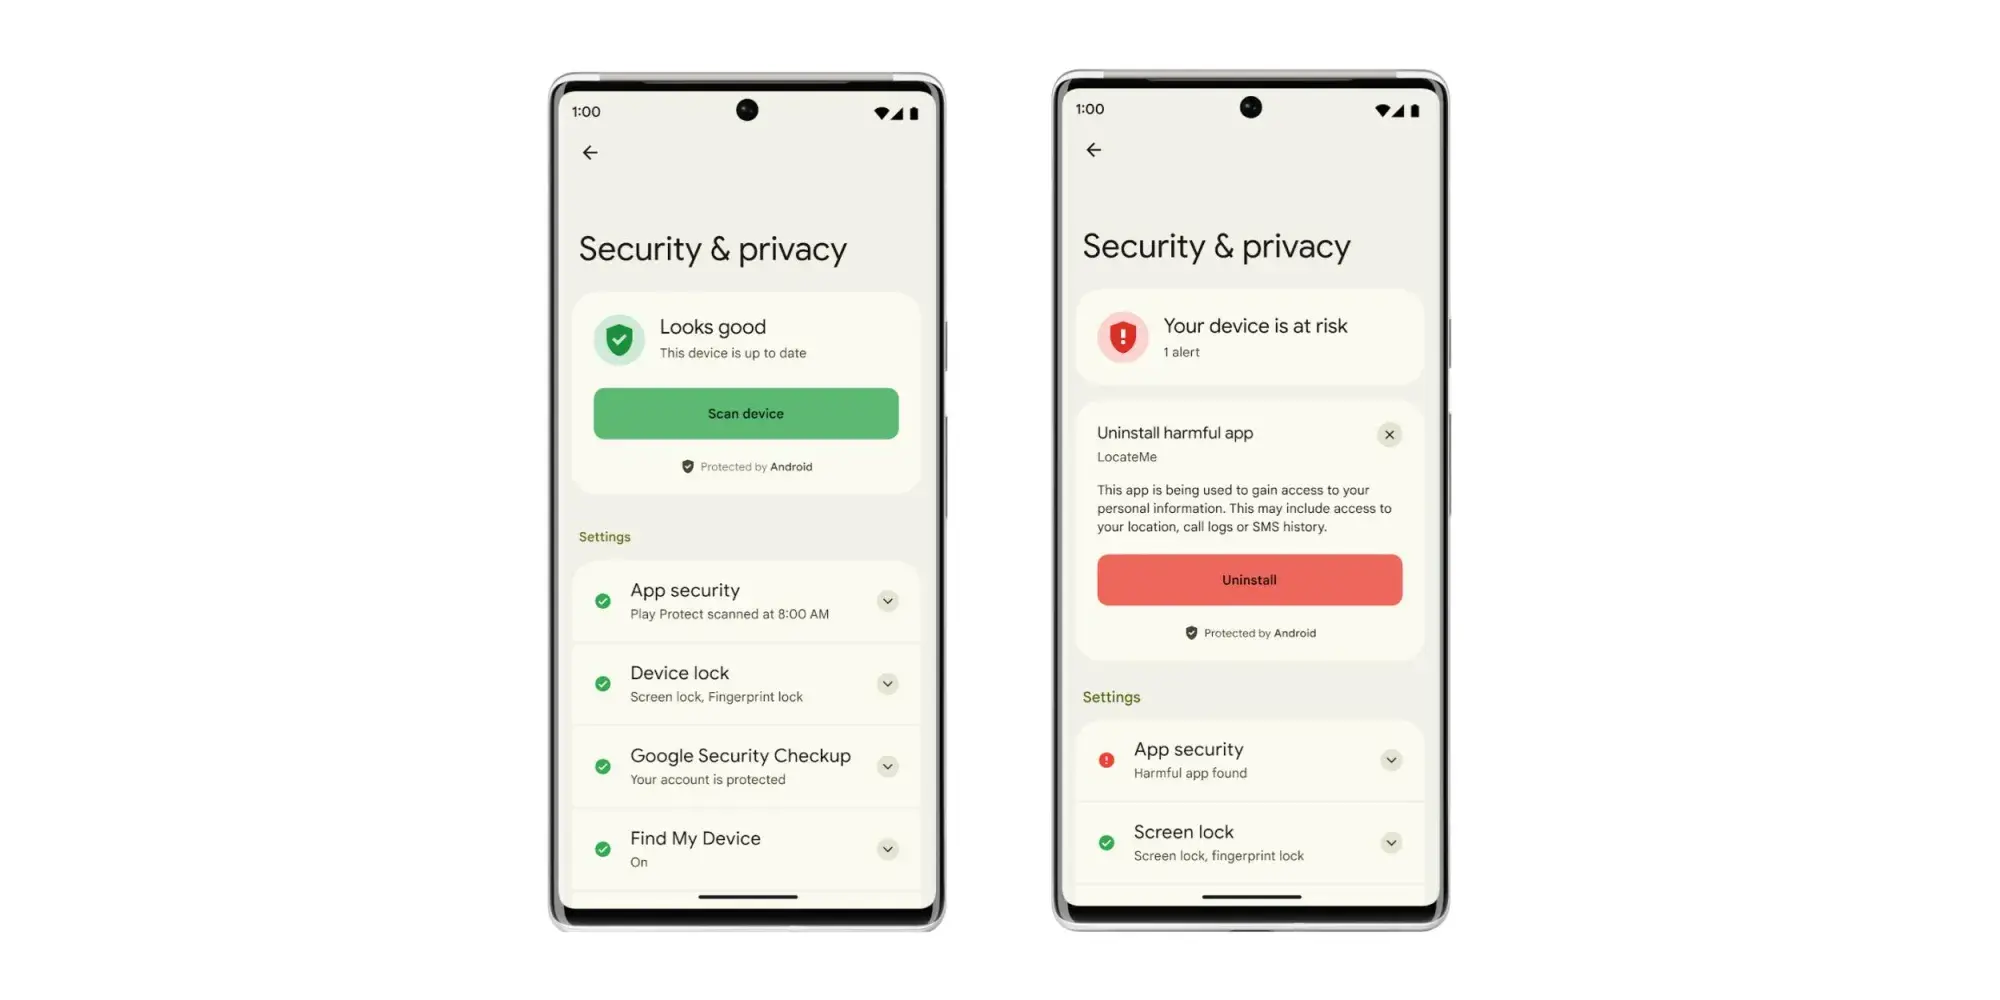 Google introduces new &quot;Protected by Android&quot; branding for security and privacy on Android